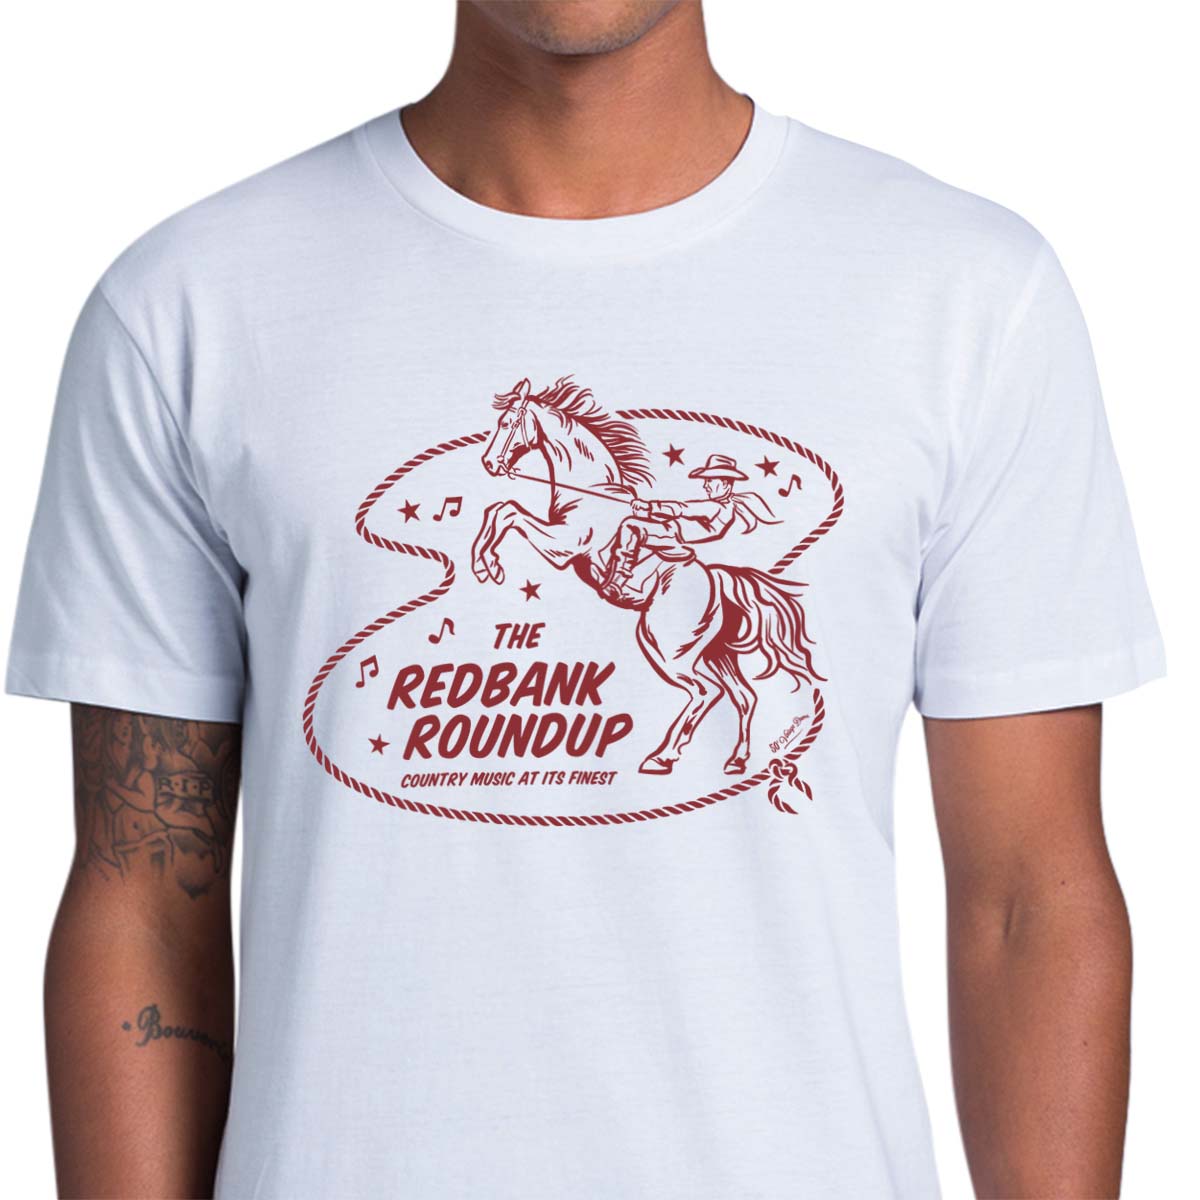 White unisex t-shirt with a cowboy riding a bucking bronco. Text says "The Red Bank Roundup - country music at its finest" A lasso, stars and music notes surround the design.